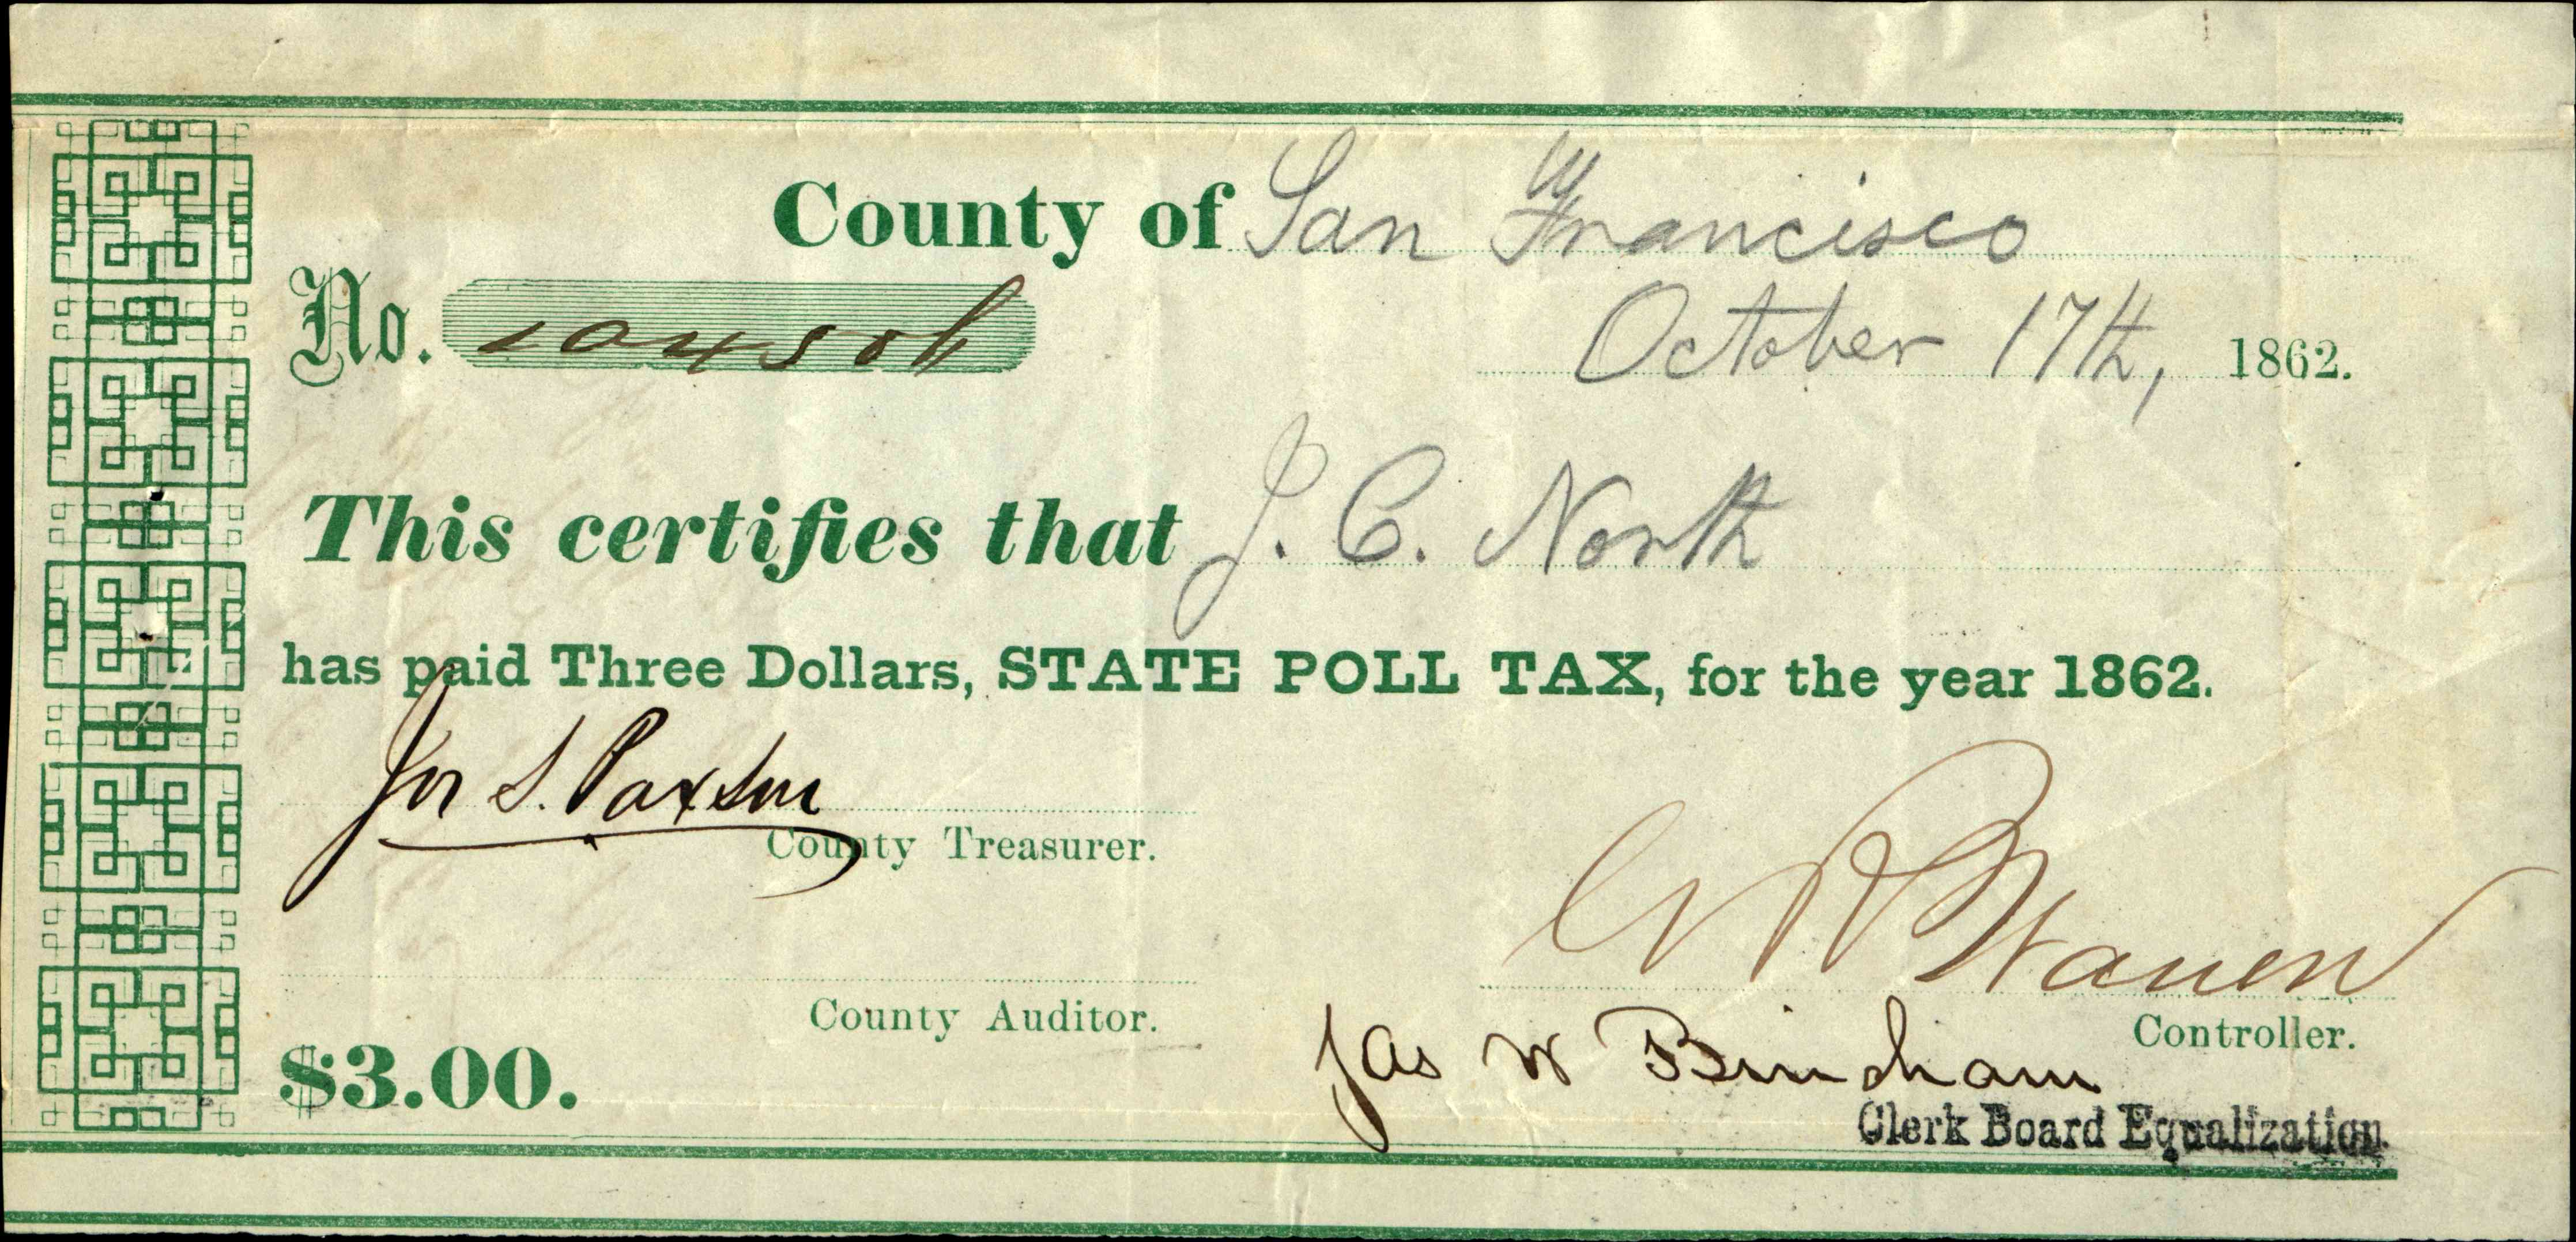 Receipt for State poll taxes